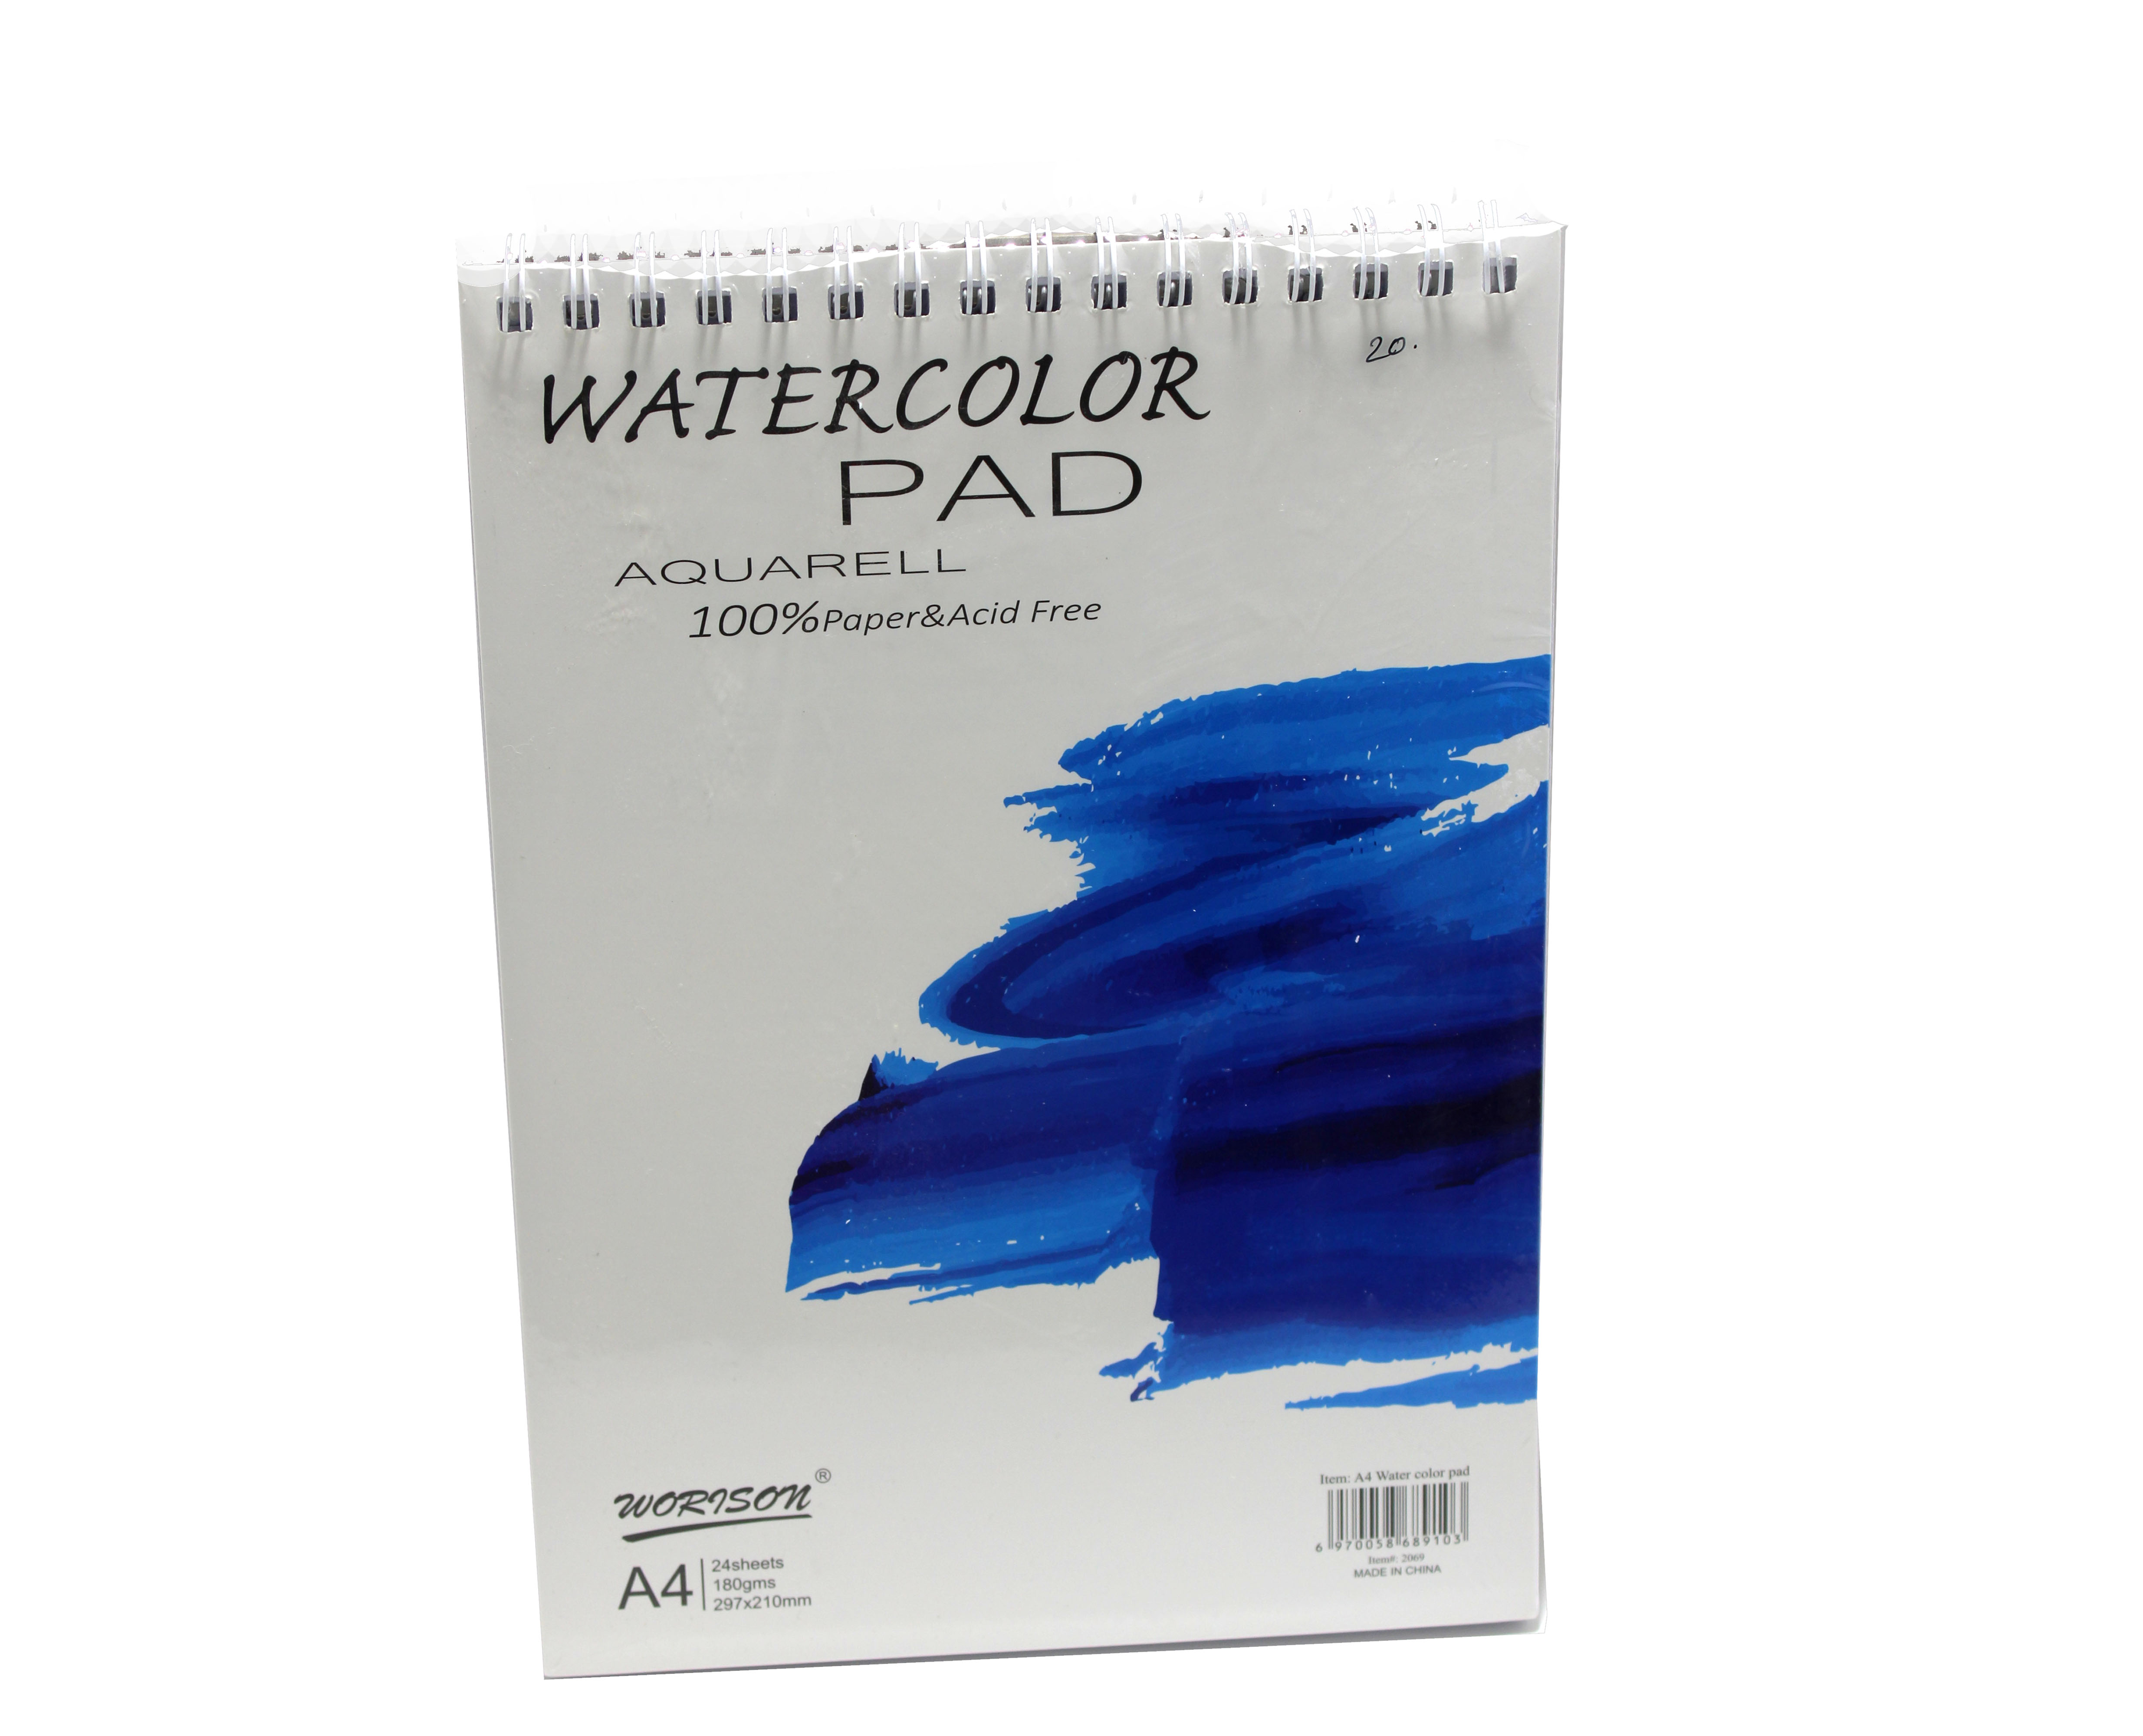 WORISON WATER COLOR PAD A3 SIZE 180 G 24 SHEETS